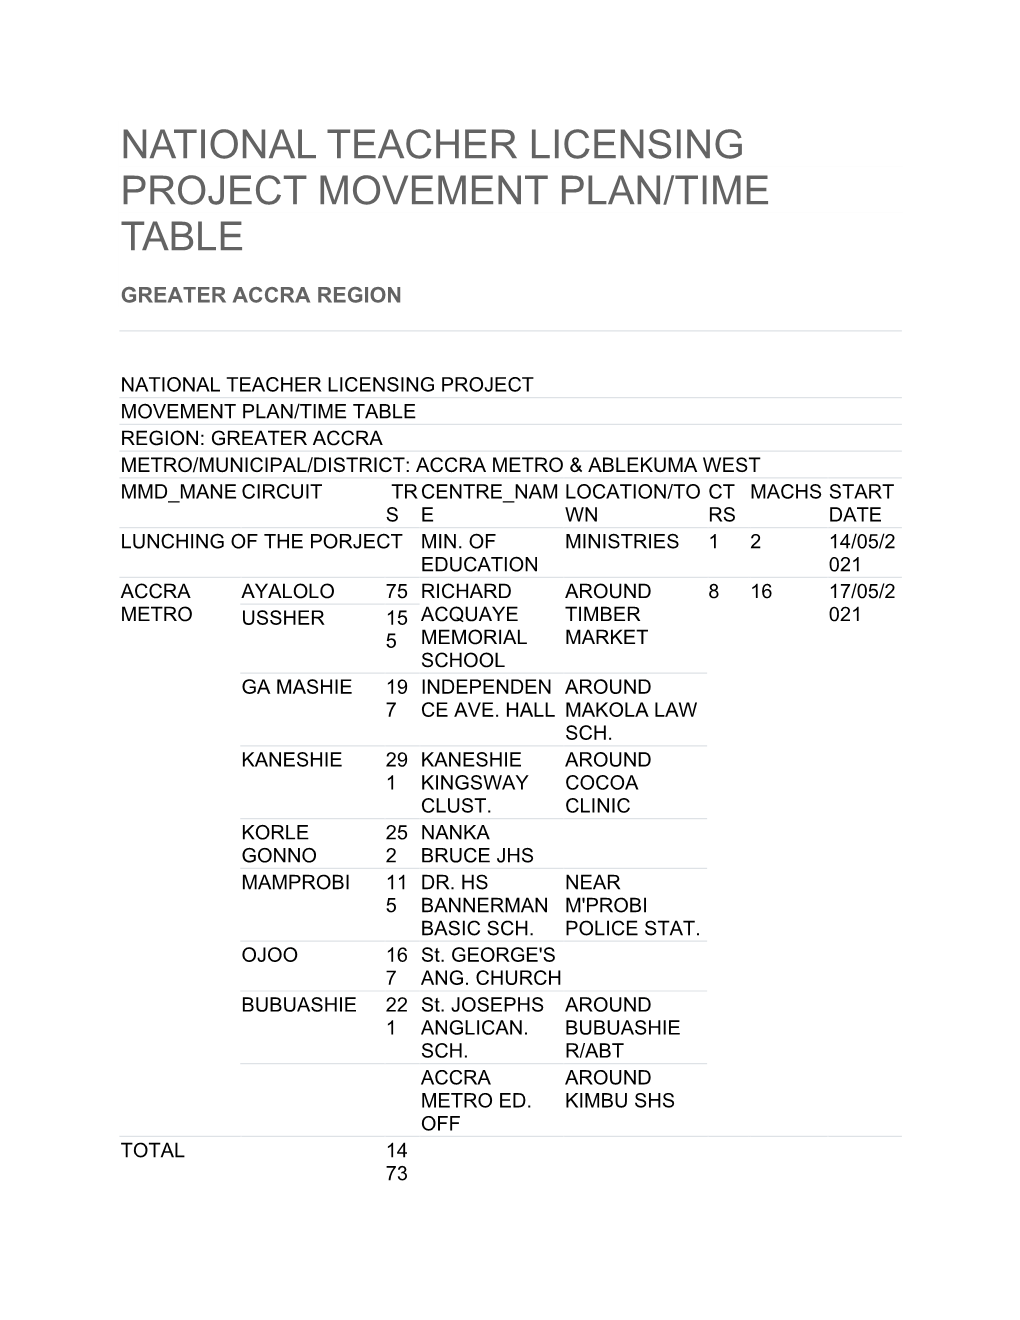 National Teacher Licensing Project Movement Plan/Time Table